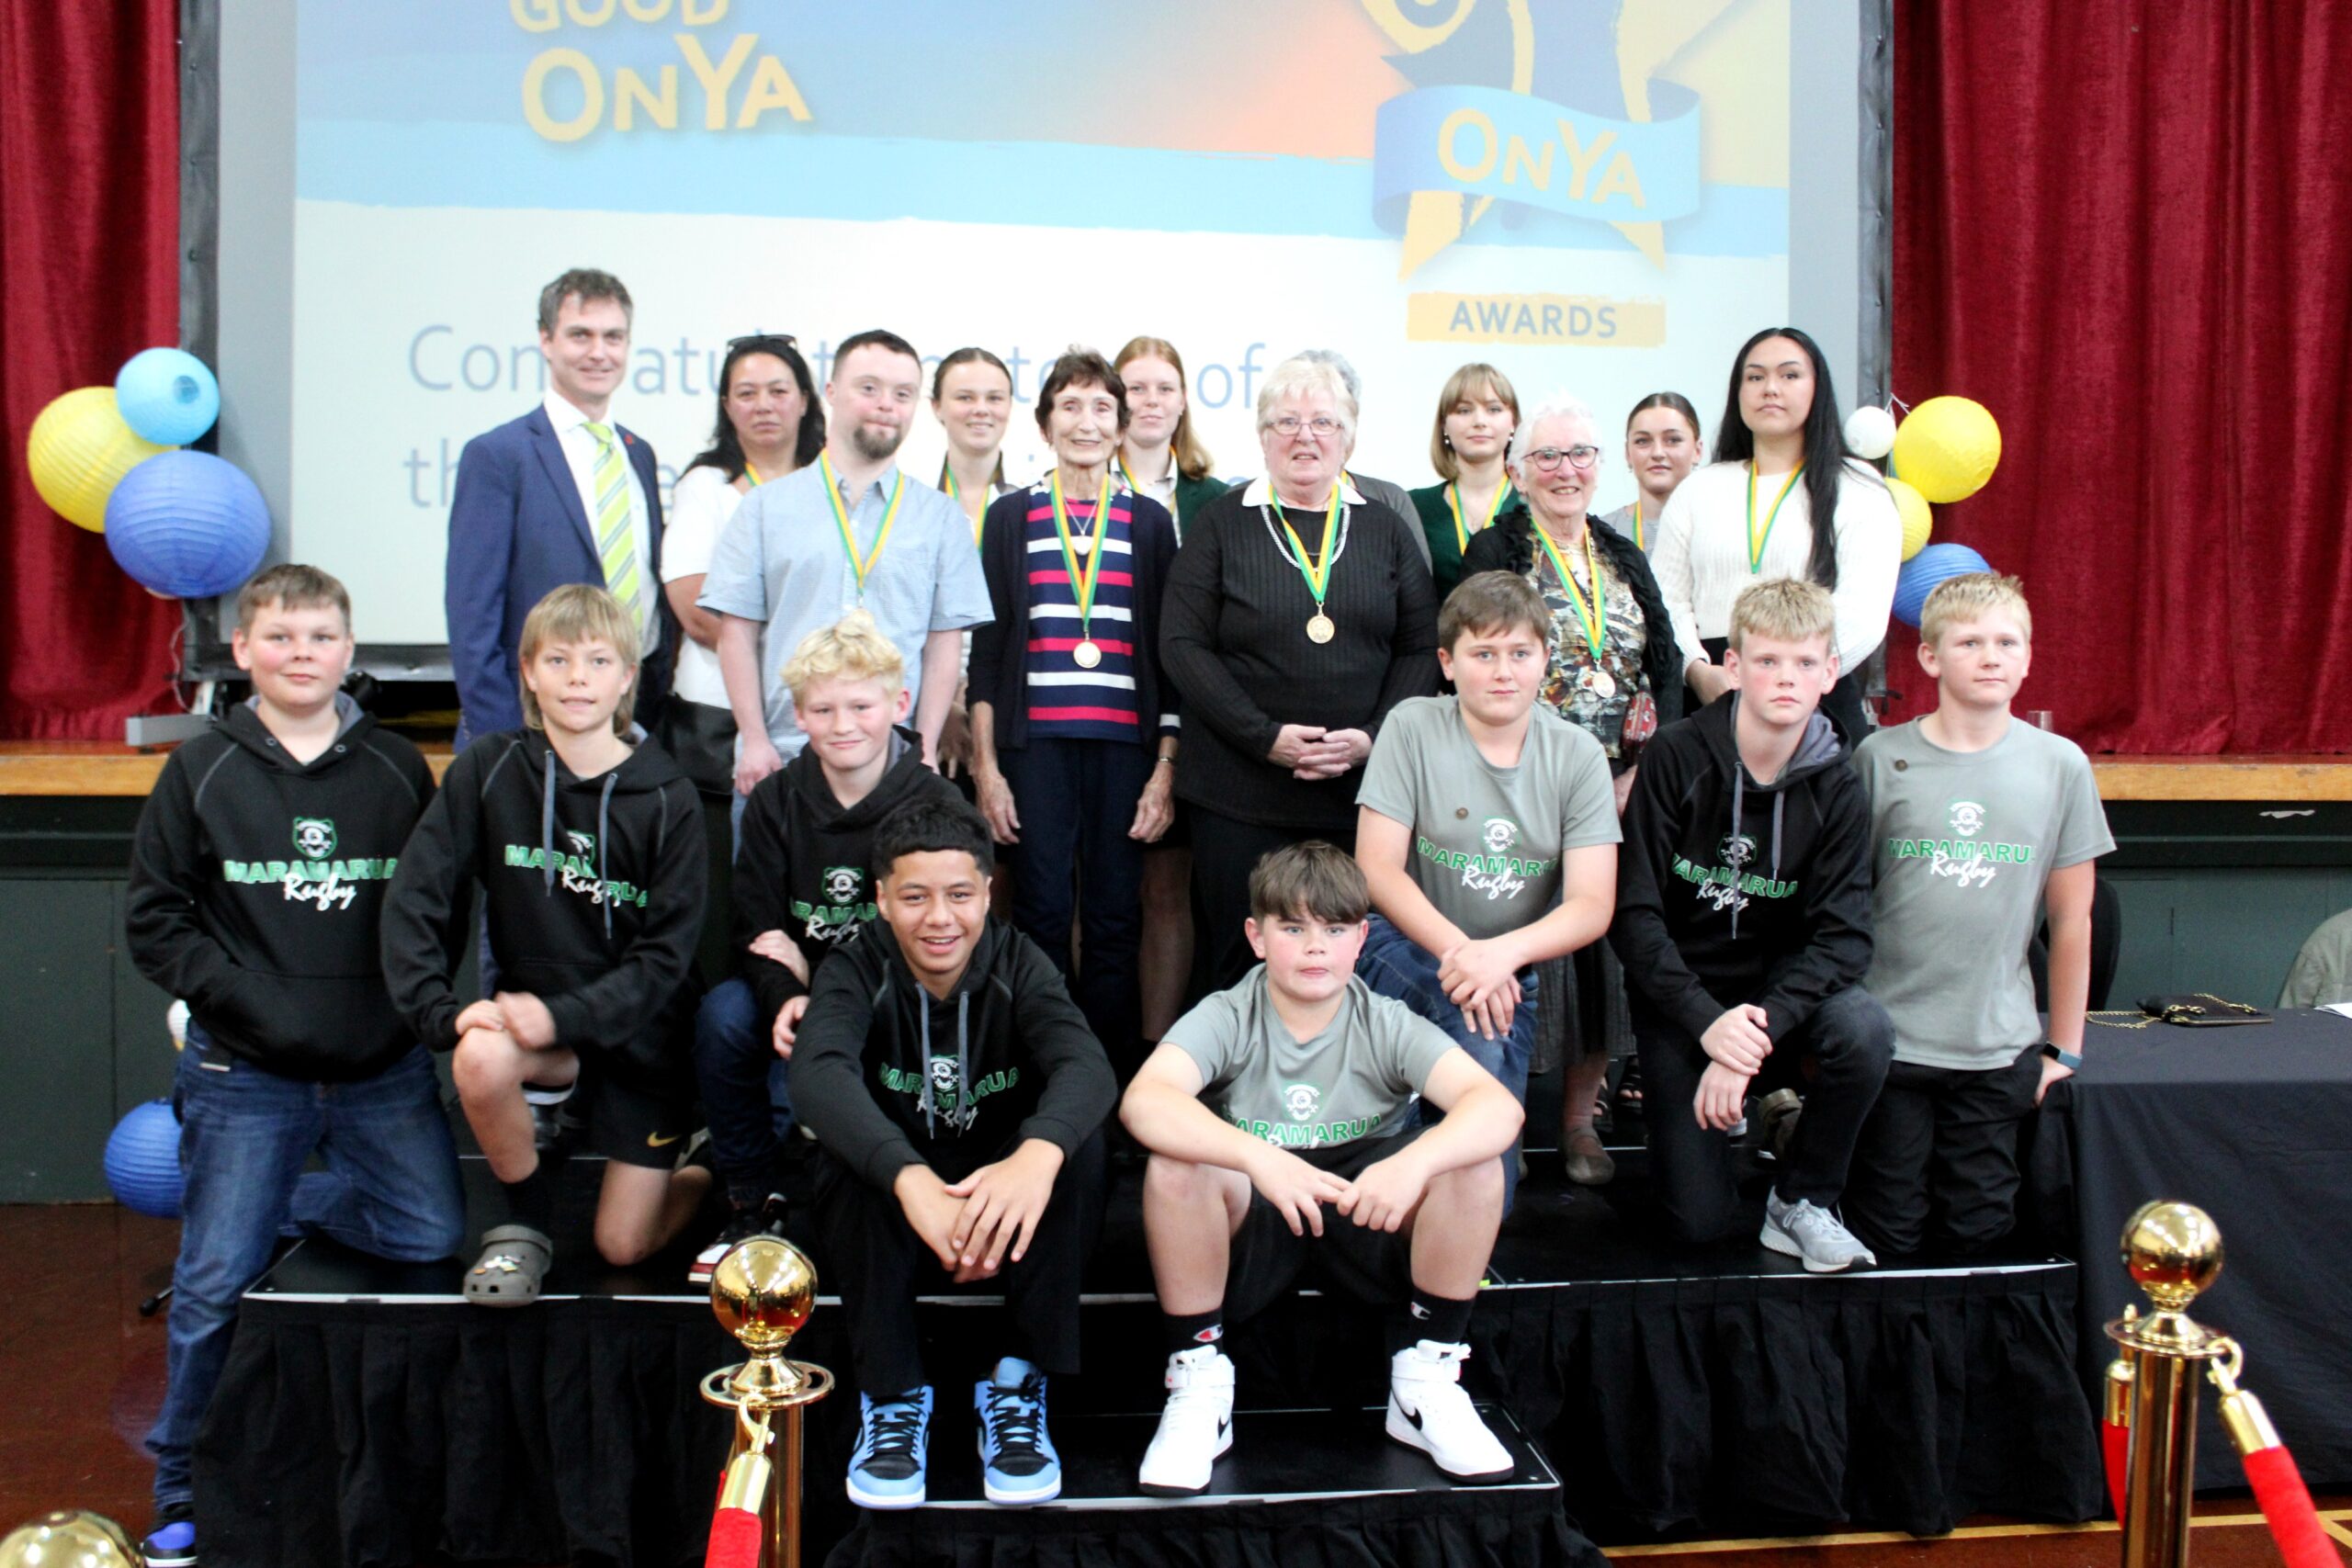 You are currently viewing ‘Good onya’ recipients honoured